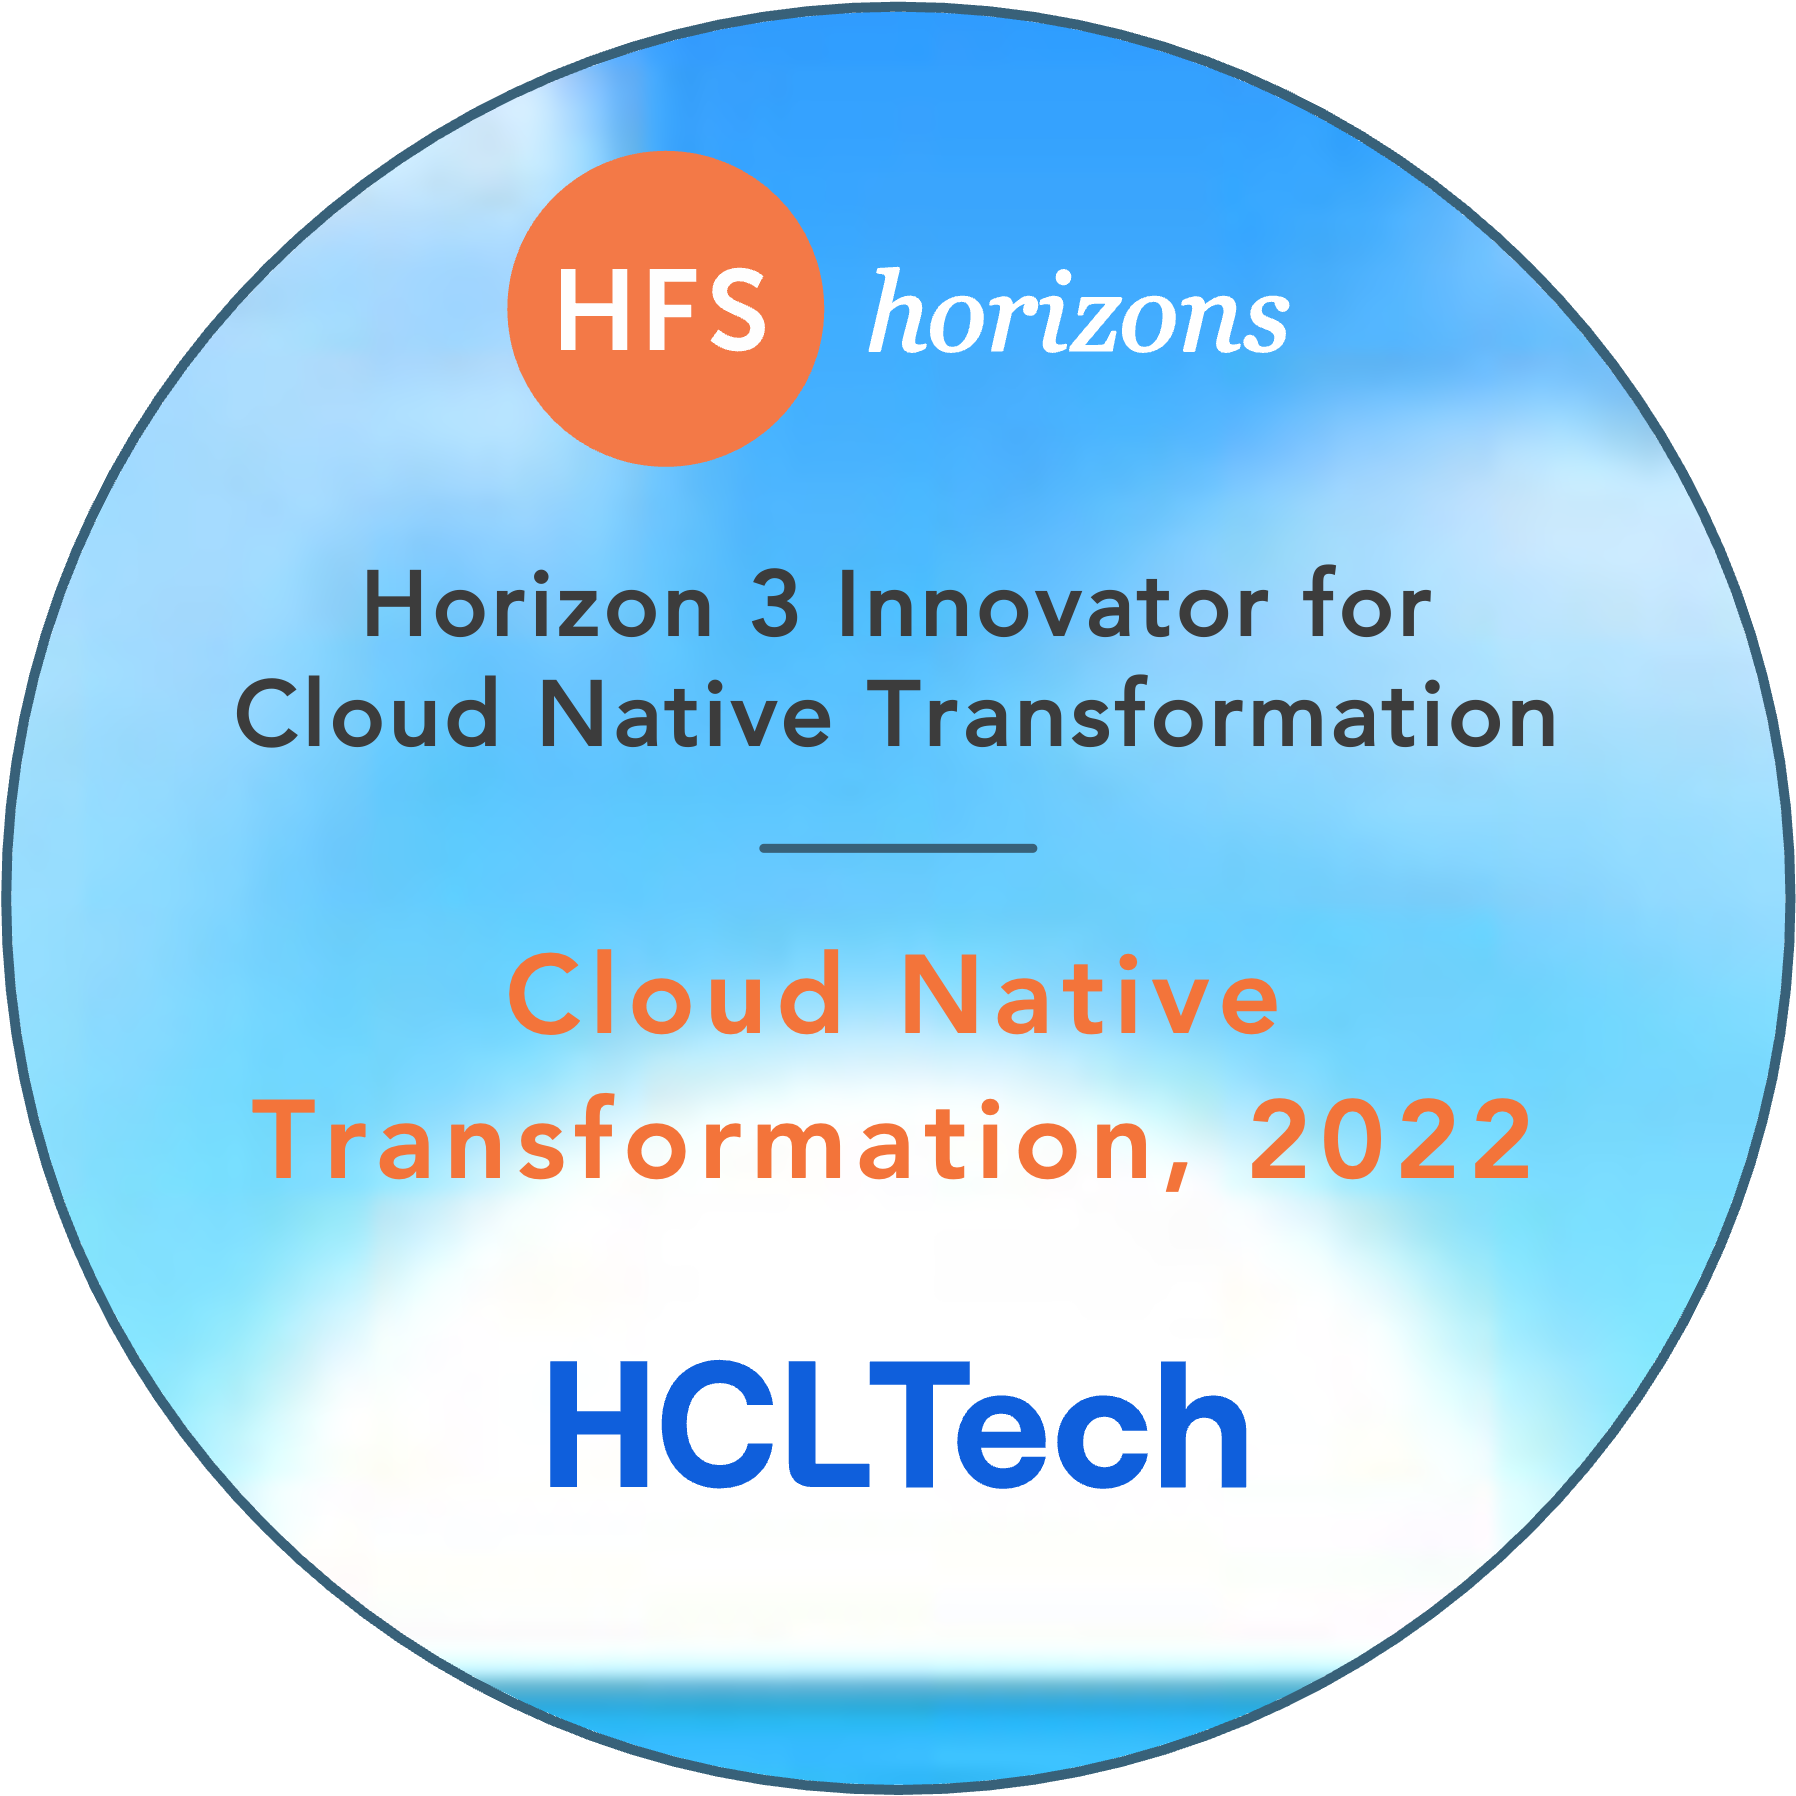 HCLTech Positioned as a Horizon 3 Innovator in HFS Horizons: Cloud Native Transformation, 2022